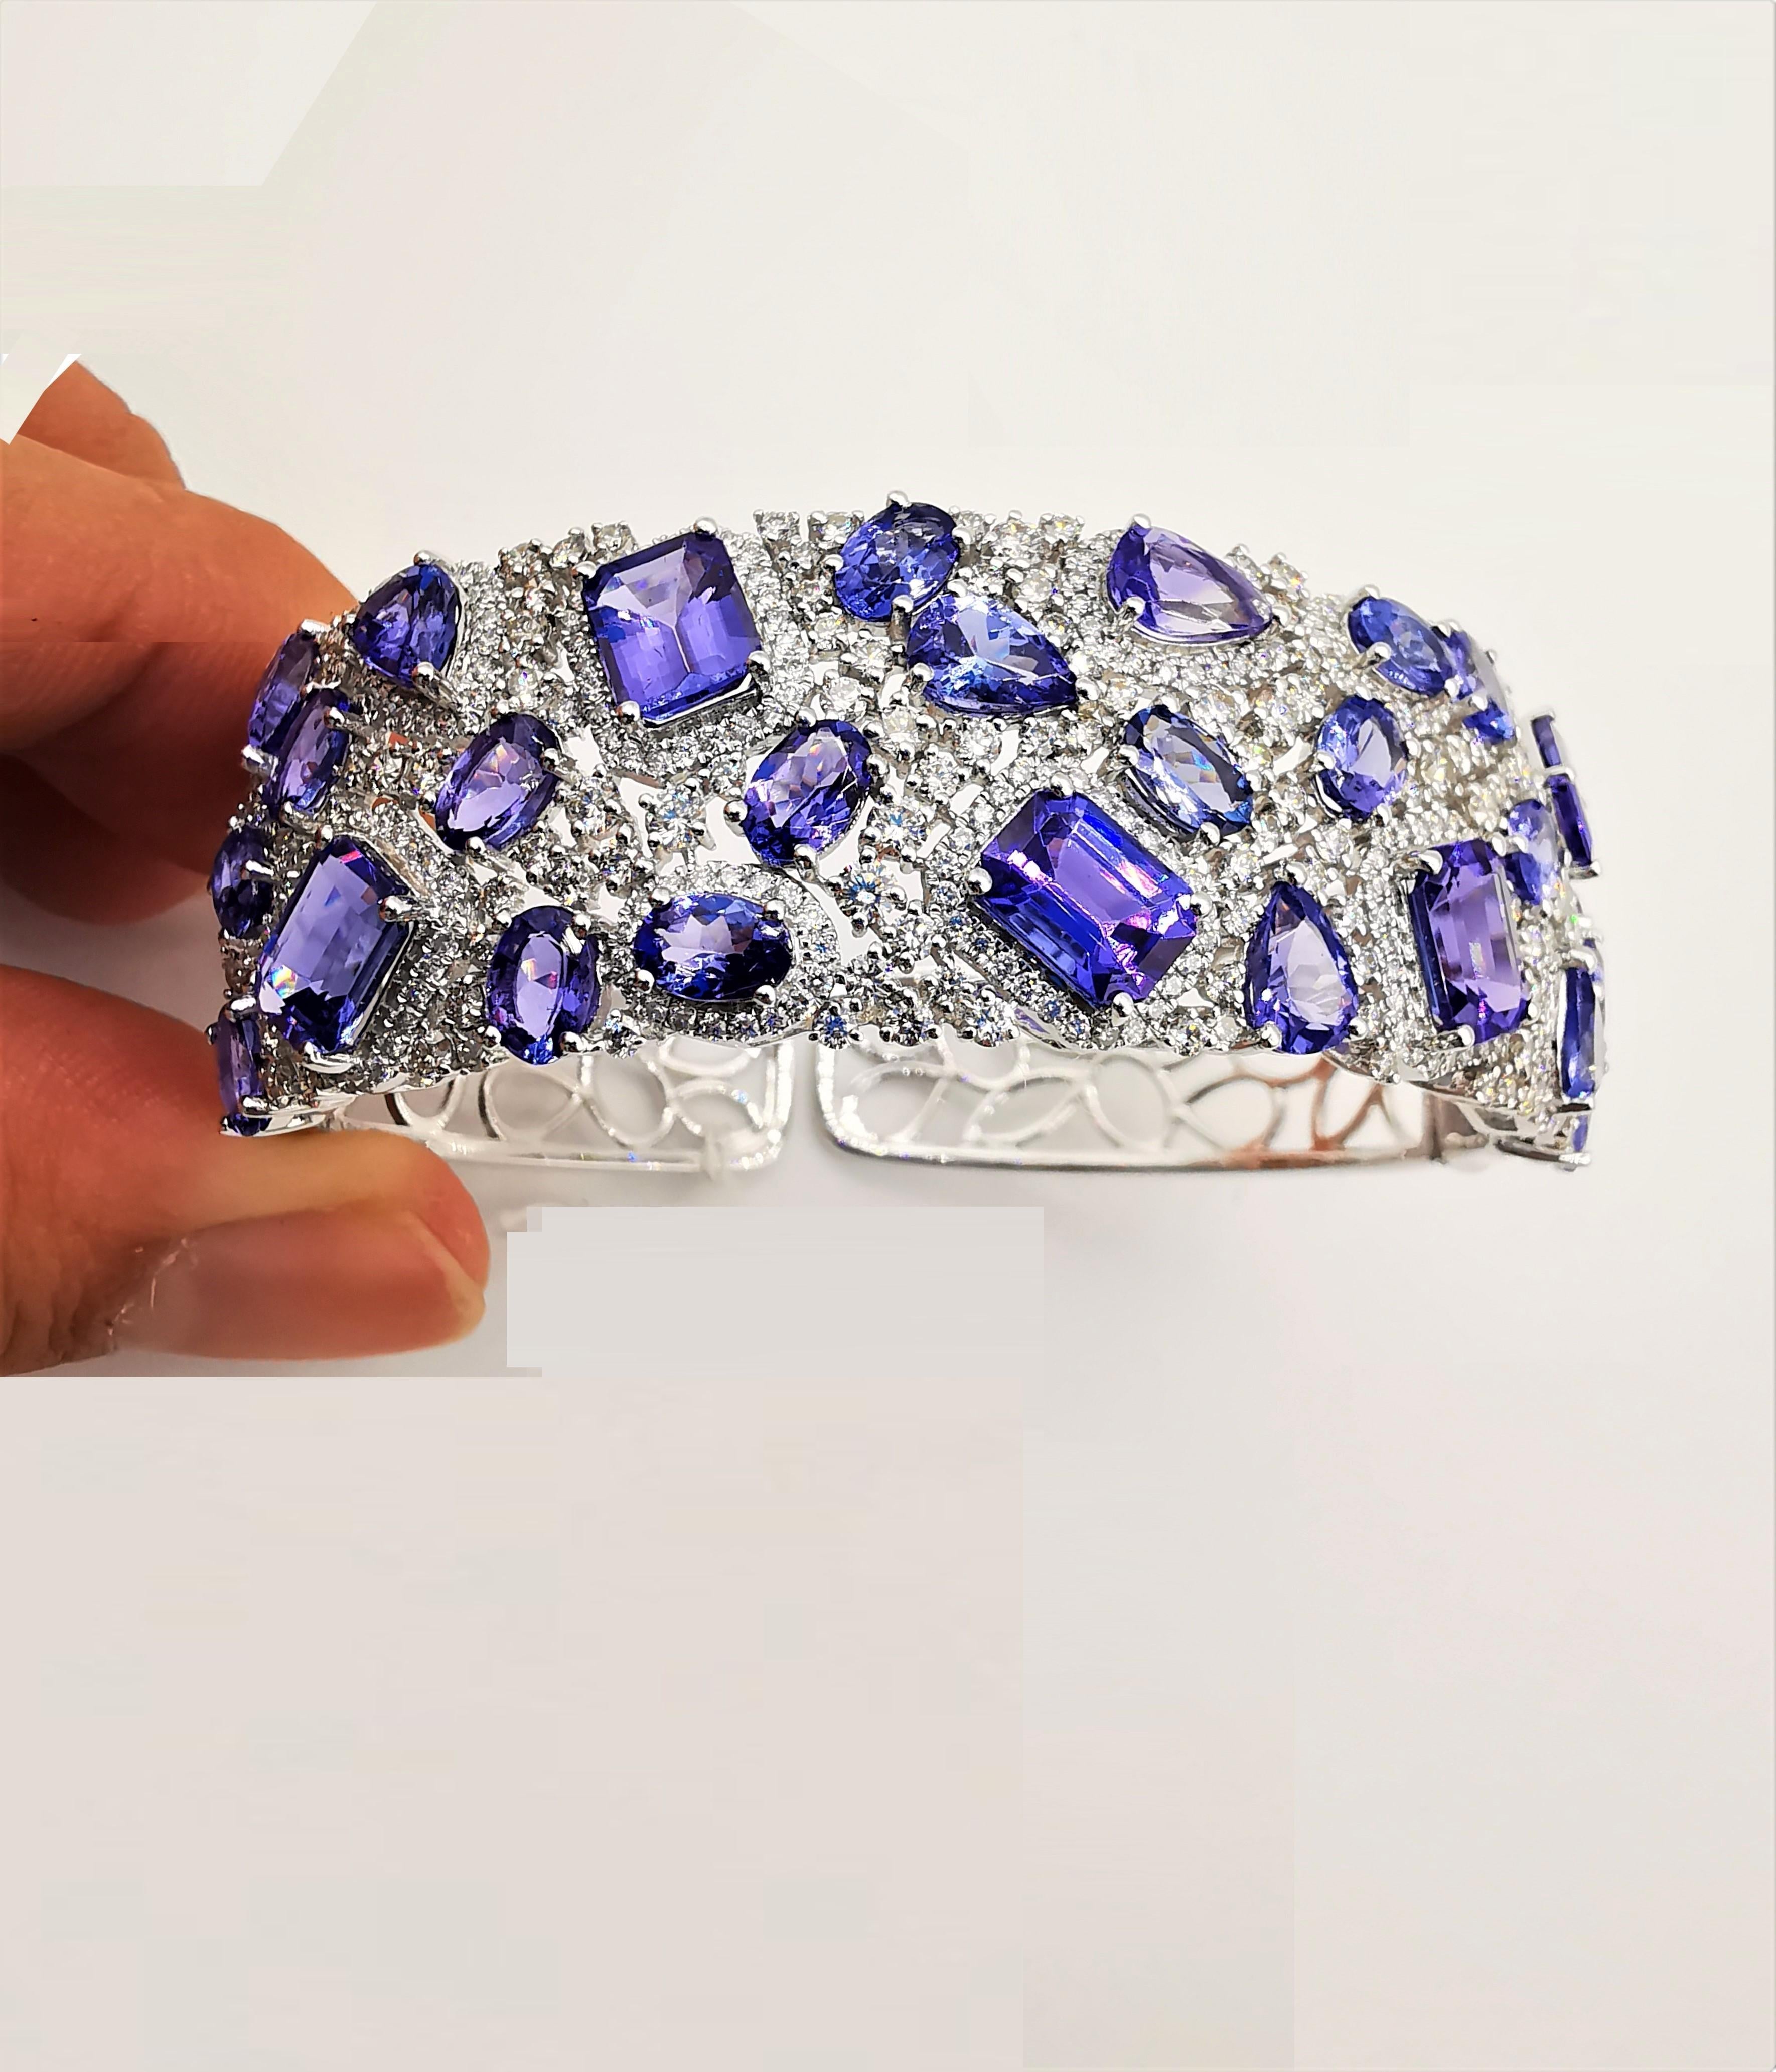 The Following Item we are offering is a Rare Important Radiant 18KT Gold Large Magnificent Rare Fancy Gorgeous Fancy Cut Tanzanites and Diamond Bangle Bracelet. Bangle is comprised of Exquisite Fancy Oval Cut Intense Rich Tanzanites connected with